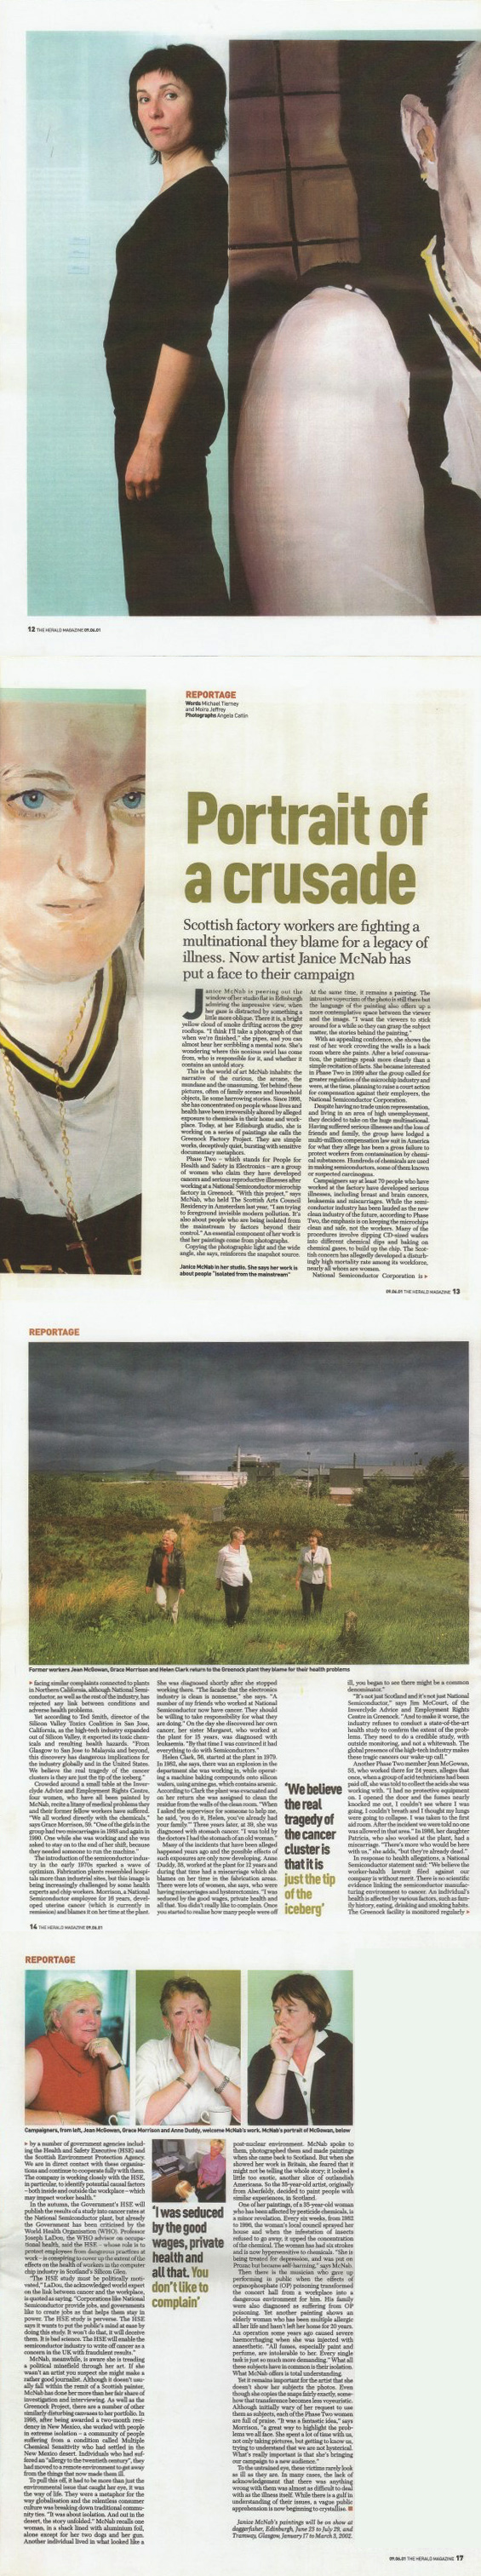 ‘The Isolation Paintings’ by Michael Tierney and Moira Jeffrey. Profile published in ‘Glasgow Herald’, (2001).